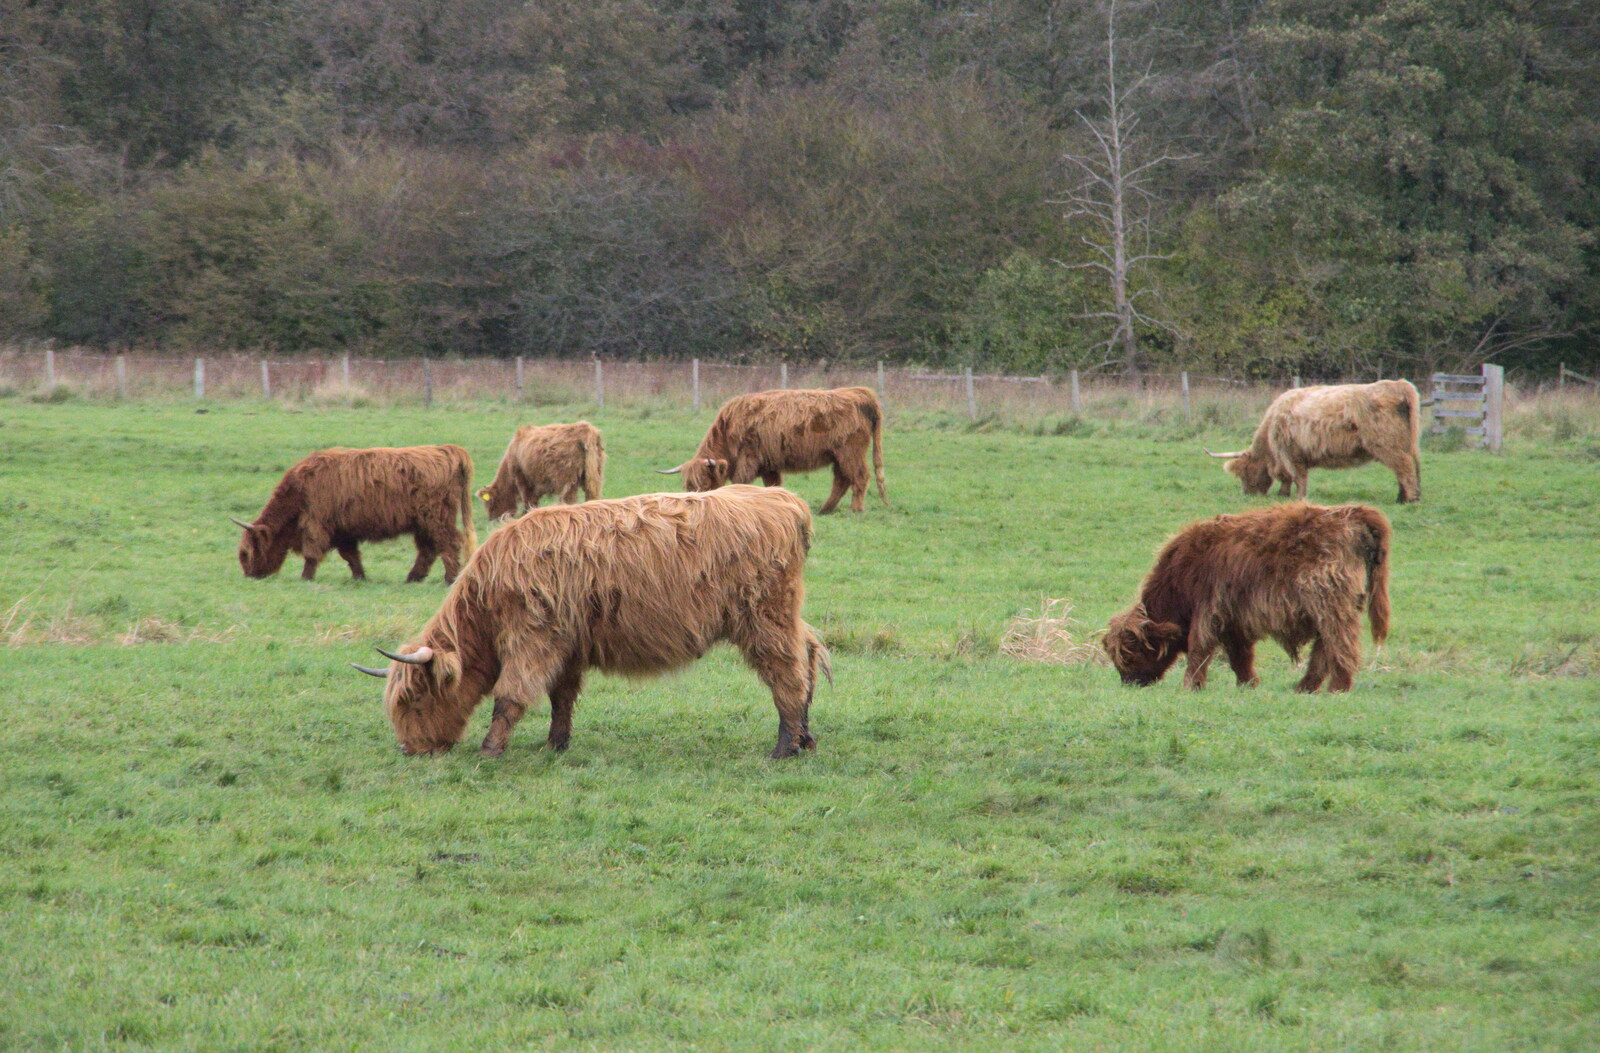 Hairy Highland cattle in a field from A Trip to Lynford Arboretum, Mundford, Norfolk - 30th October 2020